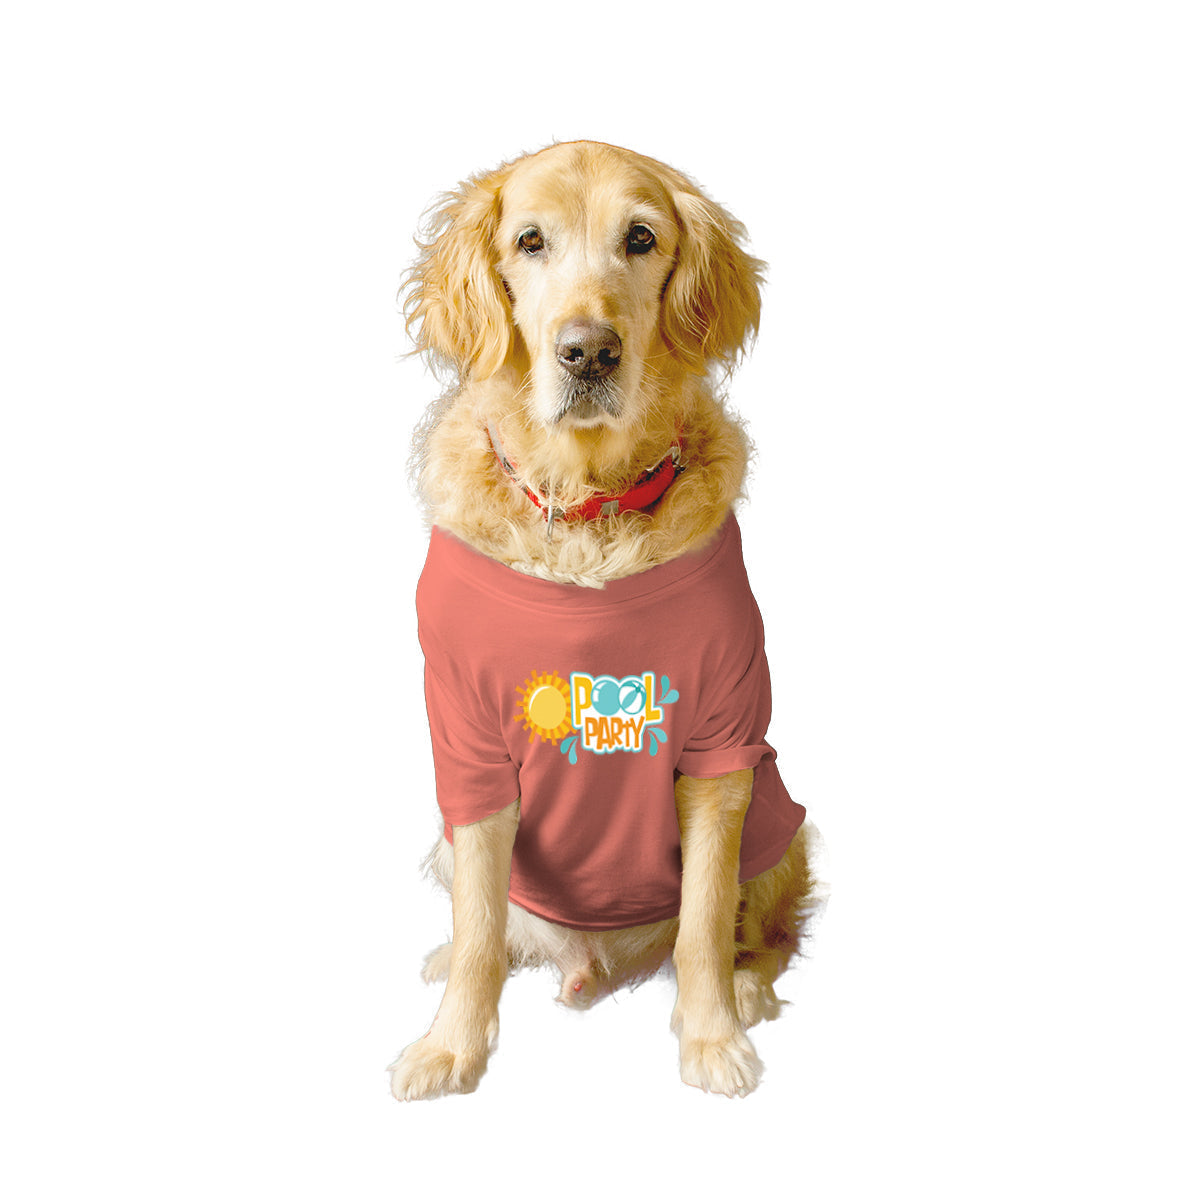 Ruse XX-Small (Chihuahuas, Papillons) / Salmon Ruse Basic Crew Neck 'Pool Party' Printed Half Sleeves Dog Tee4